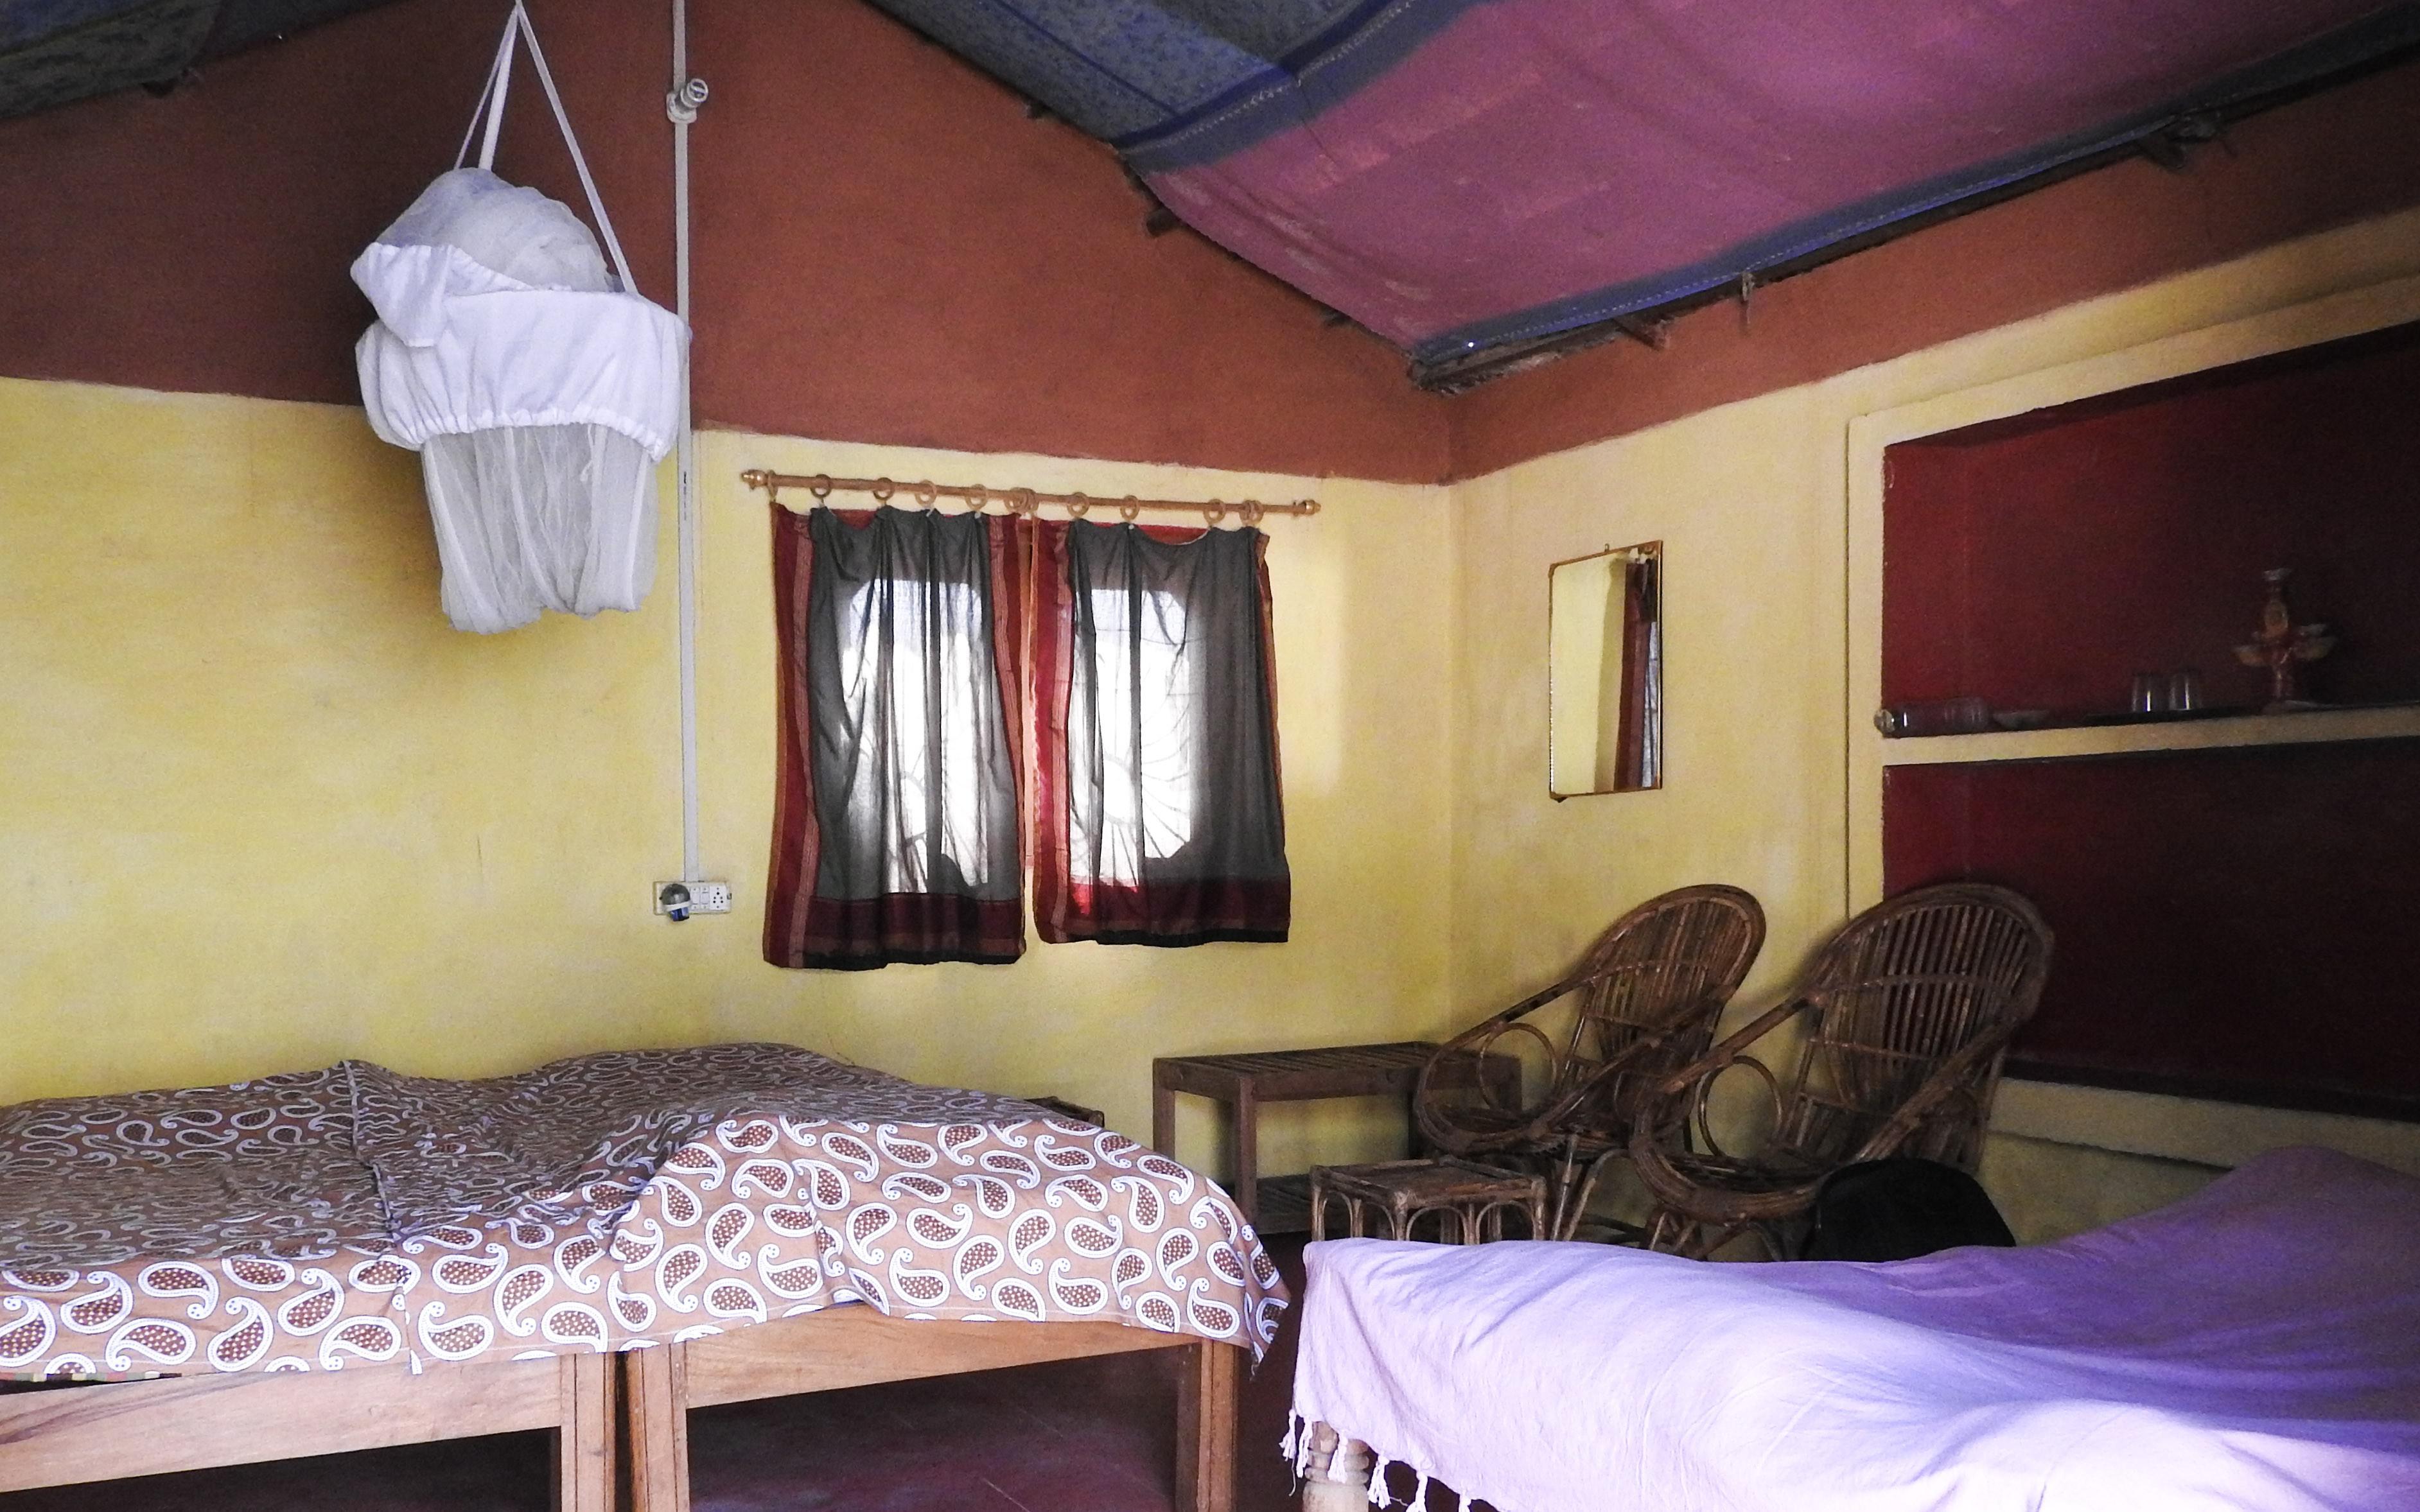 Beginning with just two families, Friends of Orchha provided seed investment to them to construct simple, cozy rooms and bathrooms for travellers. Today, it has six host families in its network, providing not only accommodation, but also meals and other travel services.